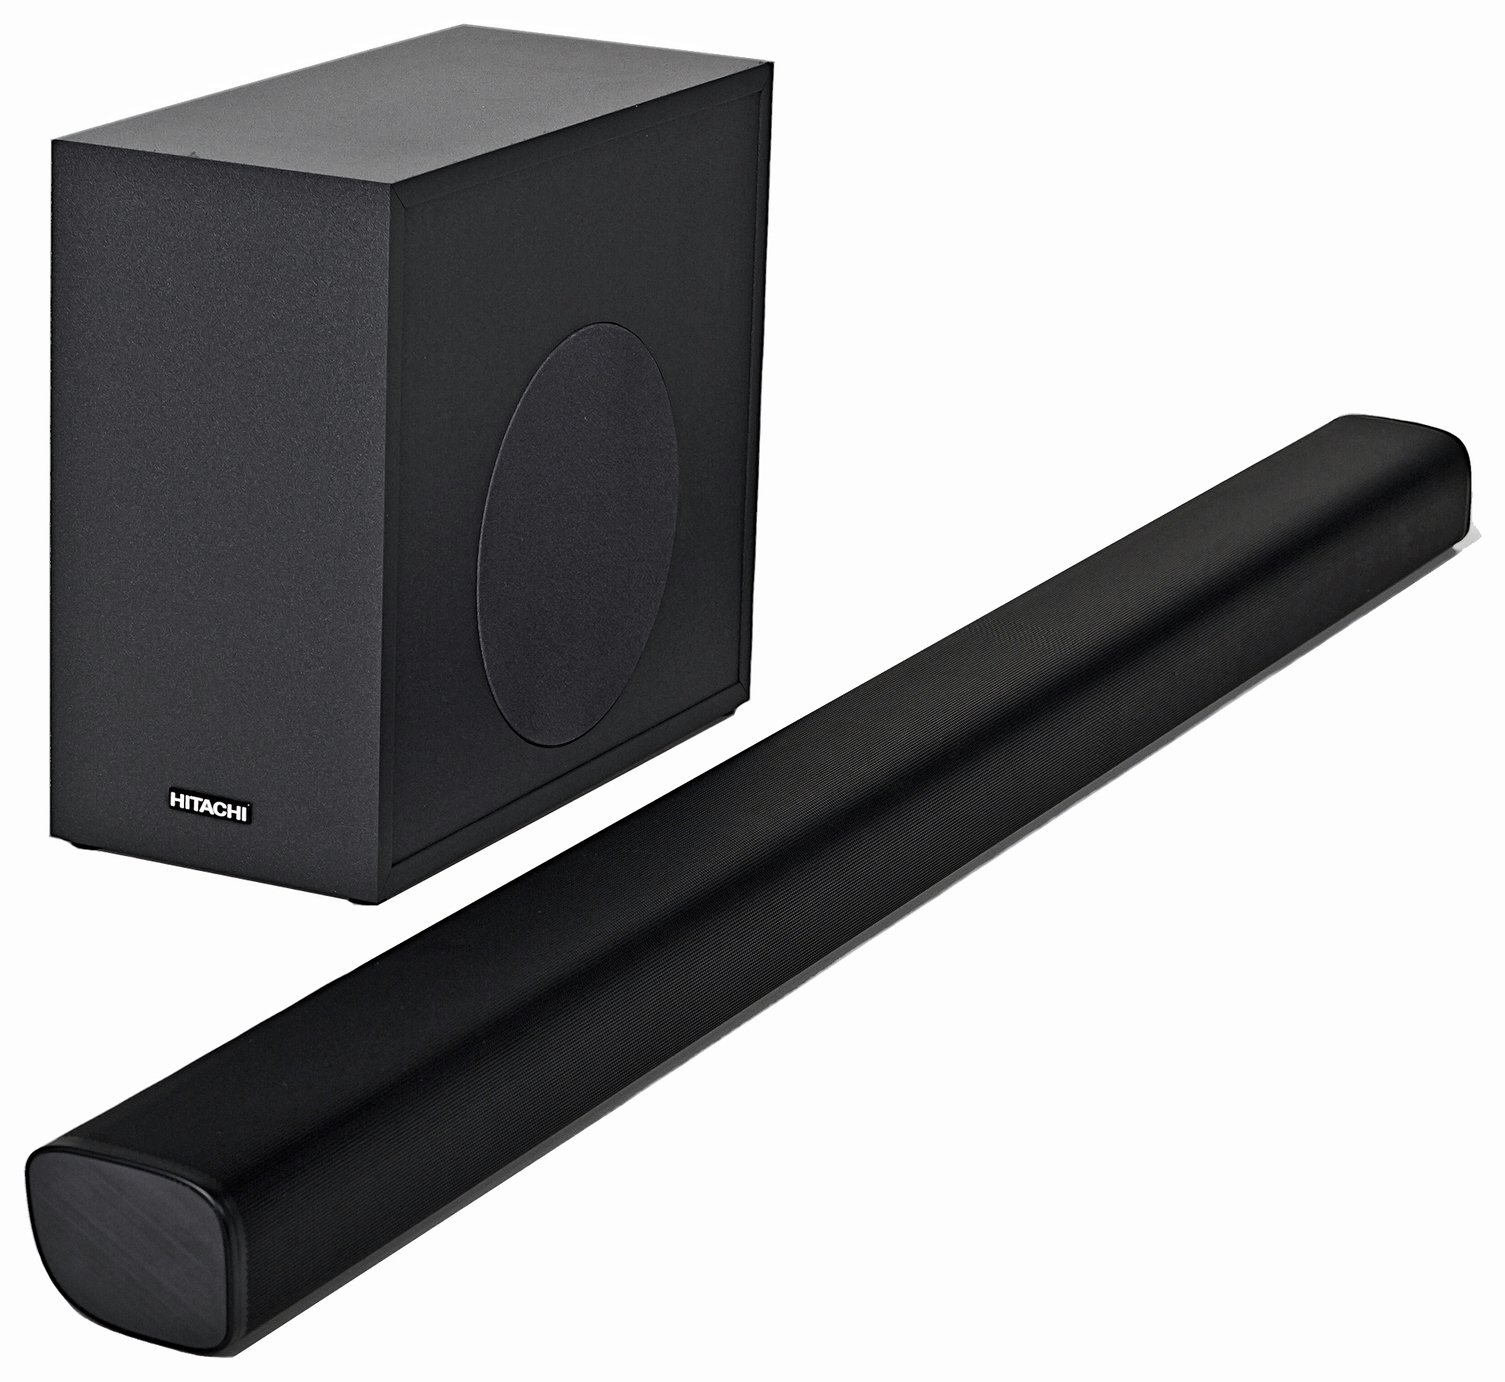 Hitachi 70W RMS 2.1Ch Sound Bar with Wireless Subwoofer Review